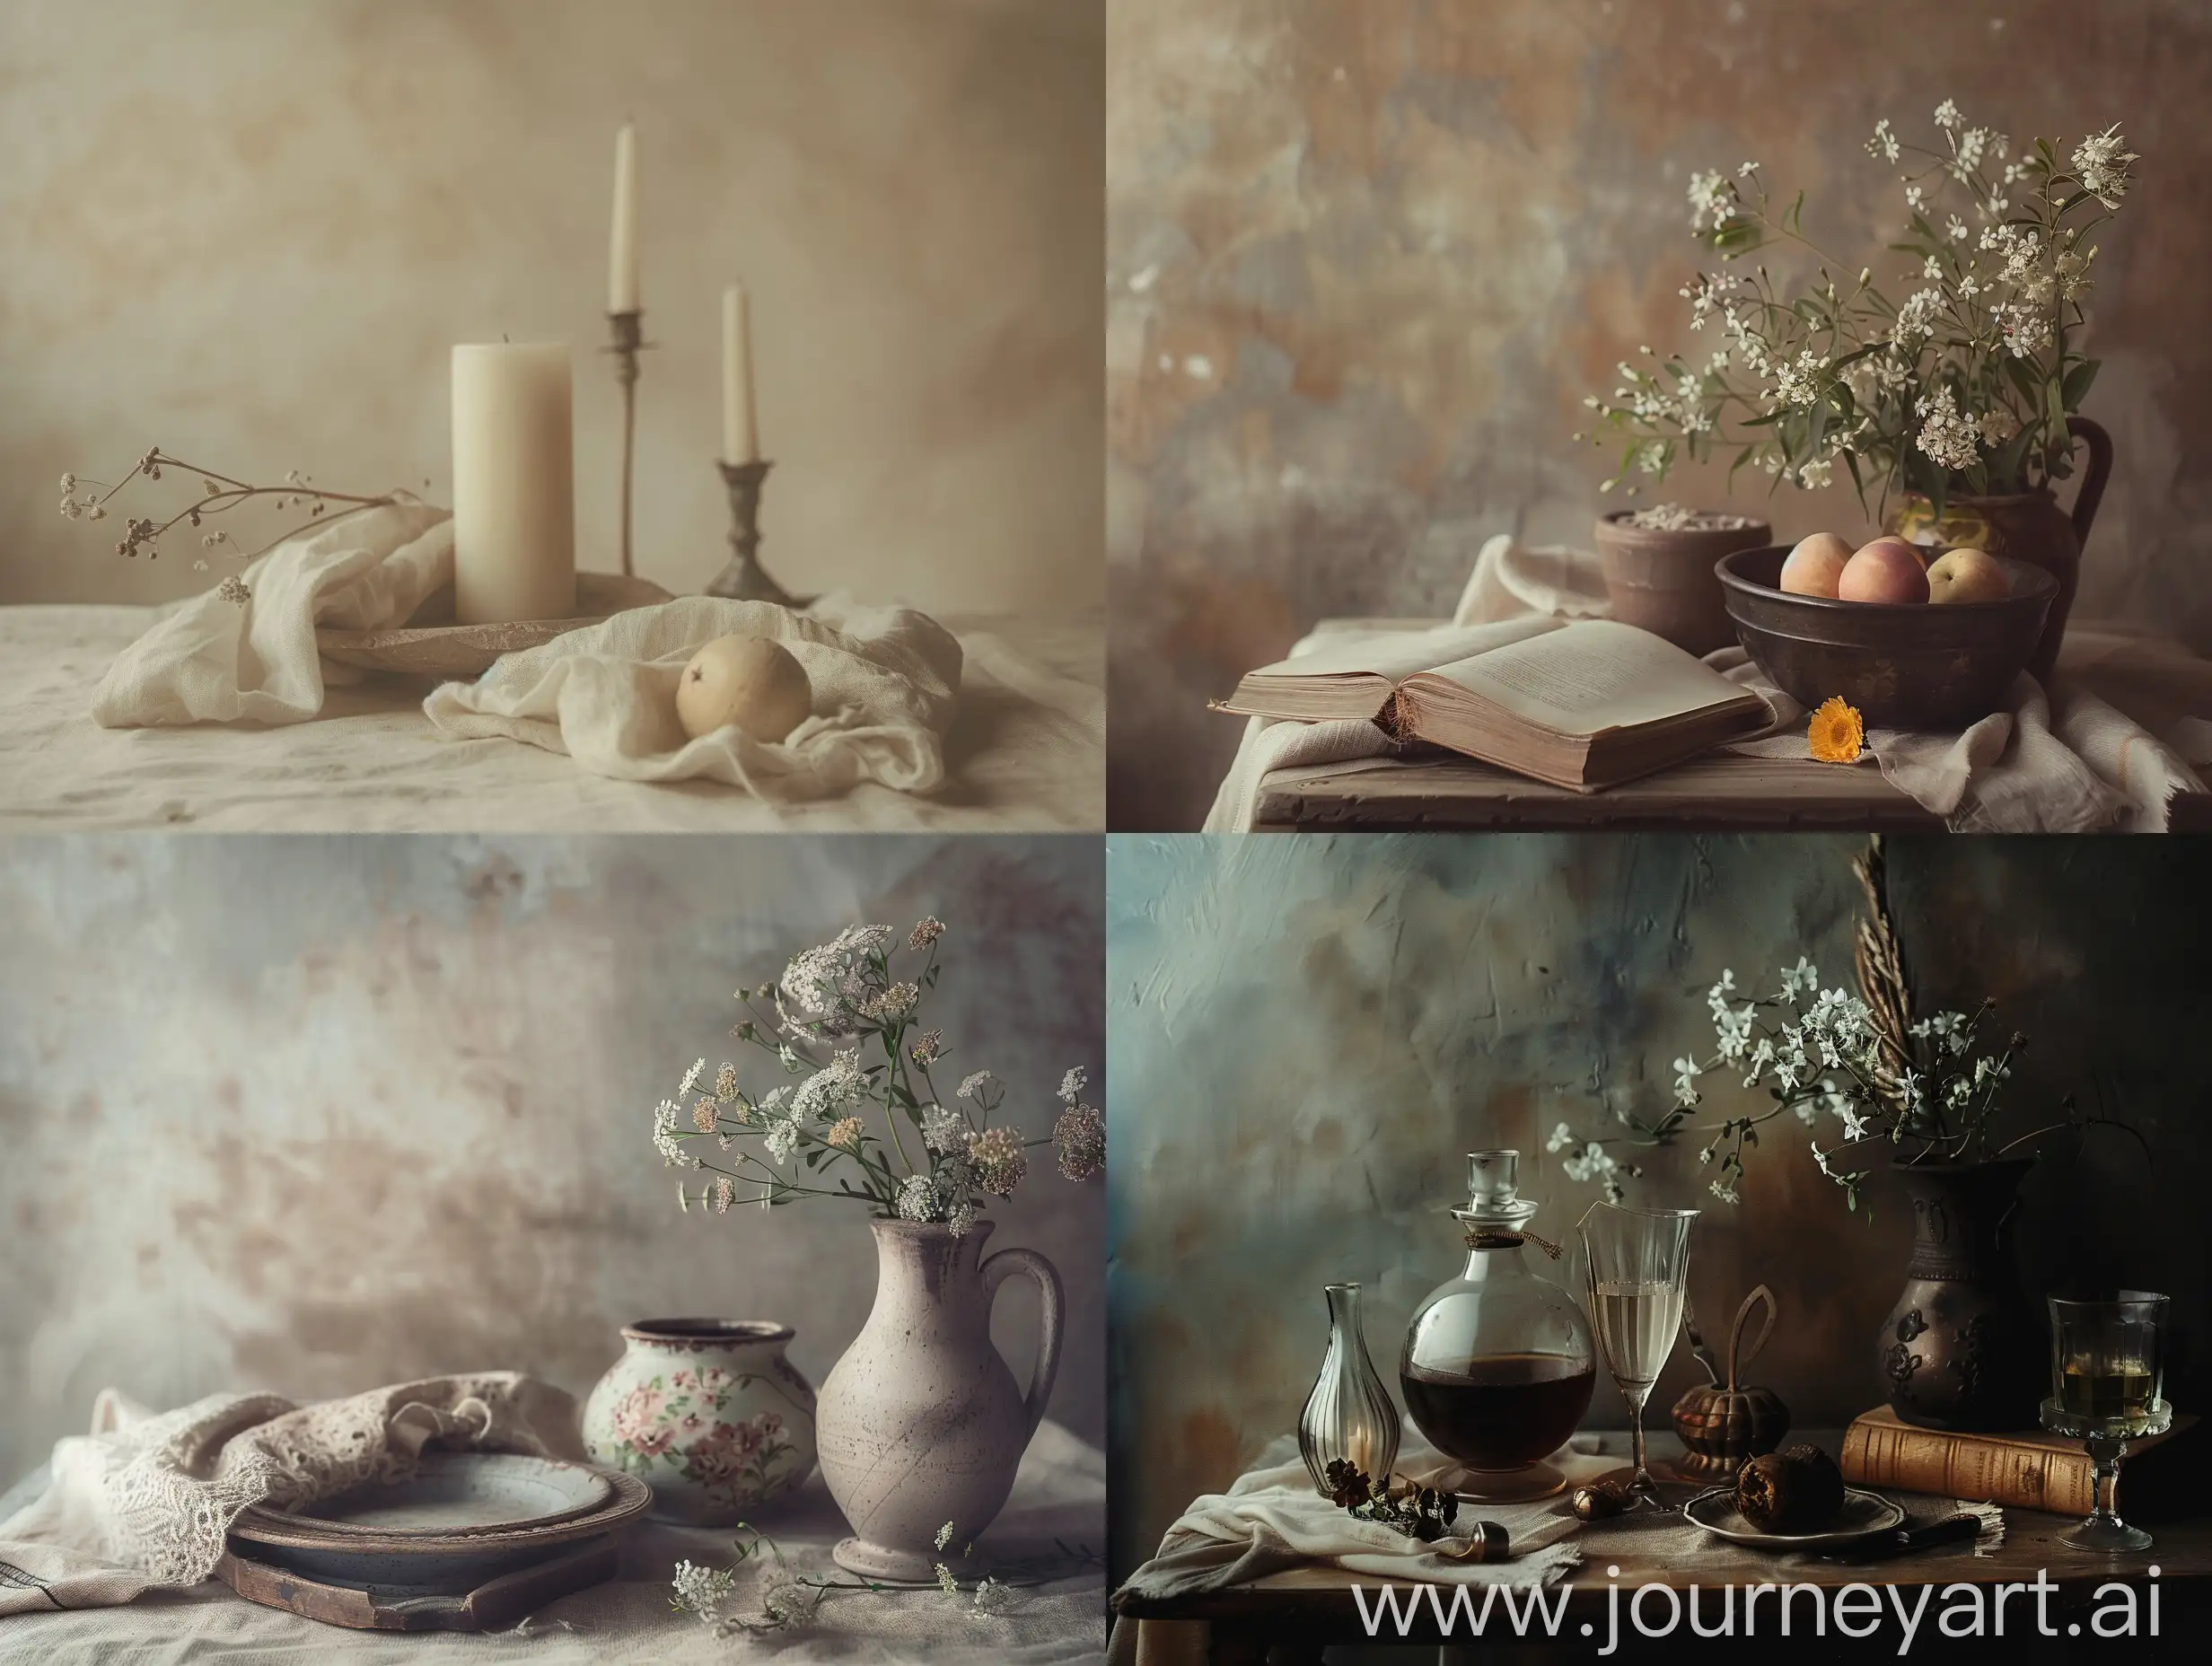 Calm-Still-Life-Vintage-Style-Studio-Photo-with-Muted-Neutral-Colors-and-Cinematic-Light